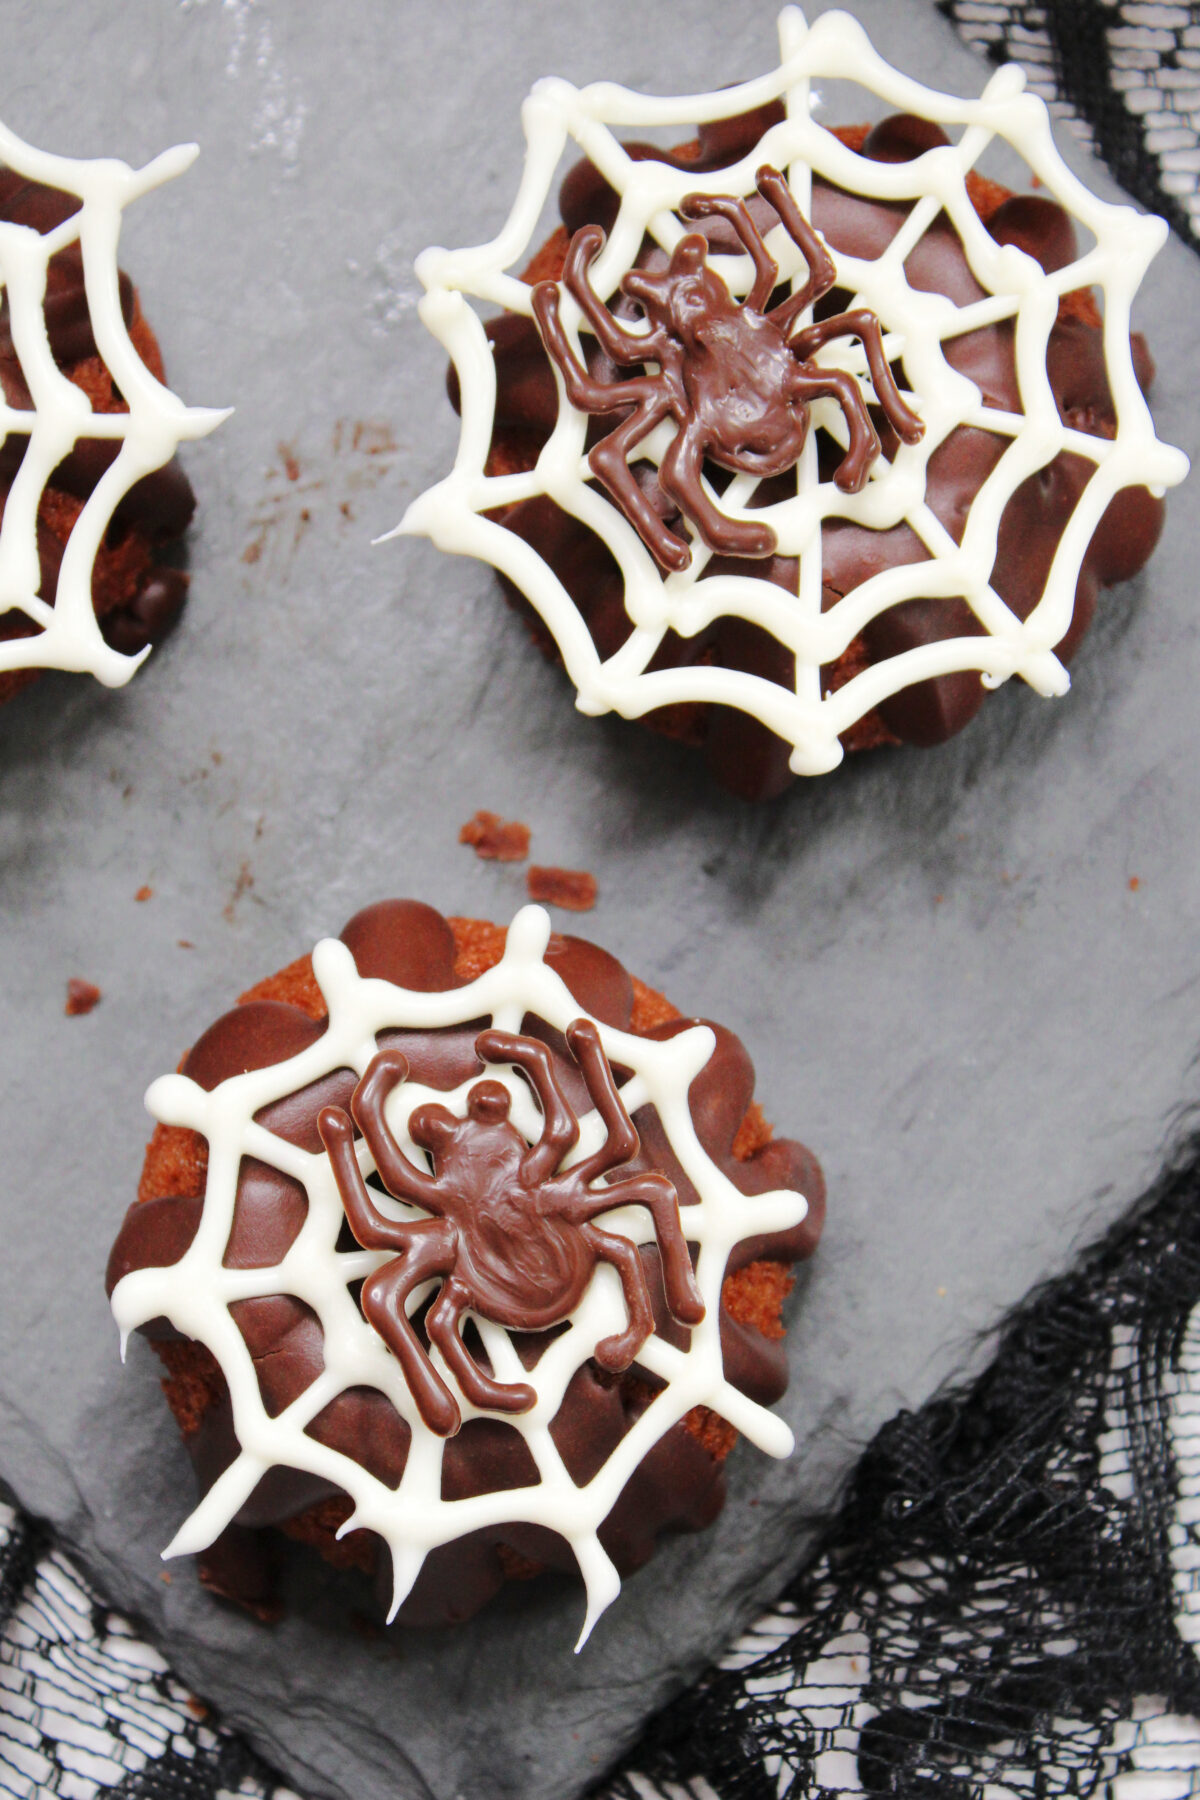 Get creative this Halloween and whip up these spooky, yet delicious mini spider bundt cakes decorated with chocolate spiders and webs.